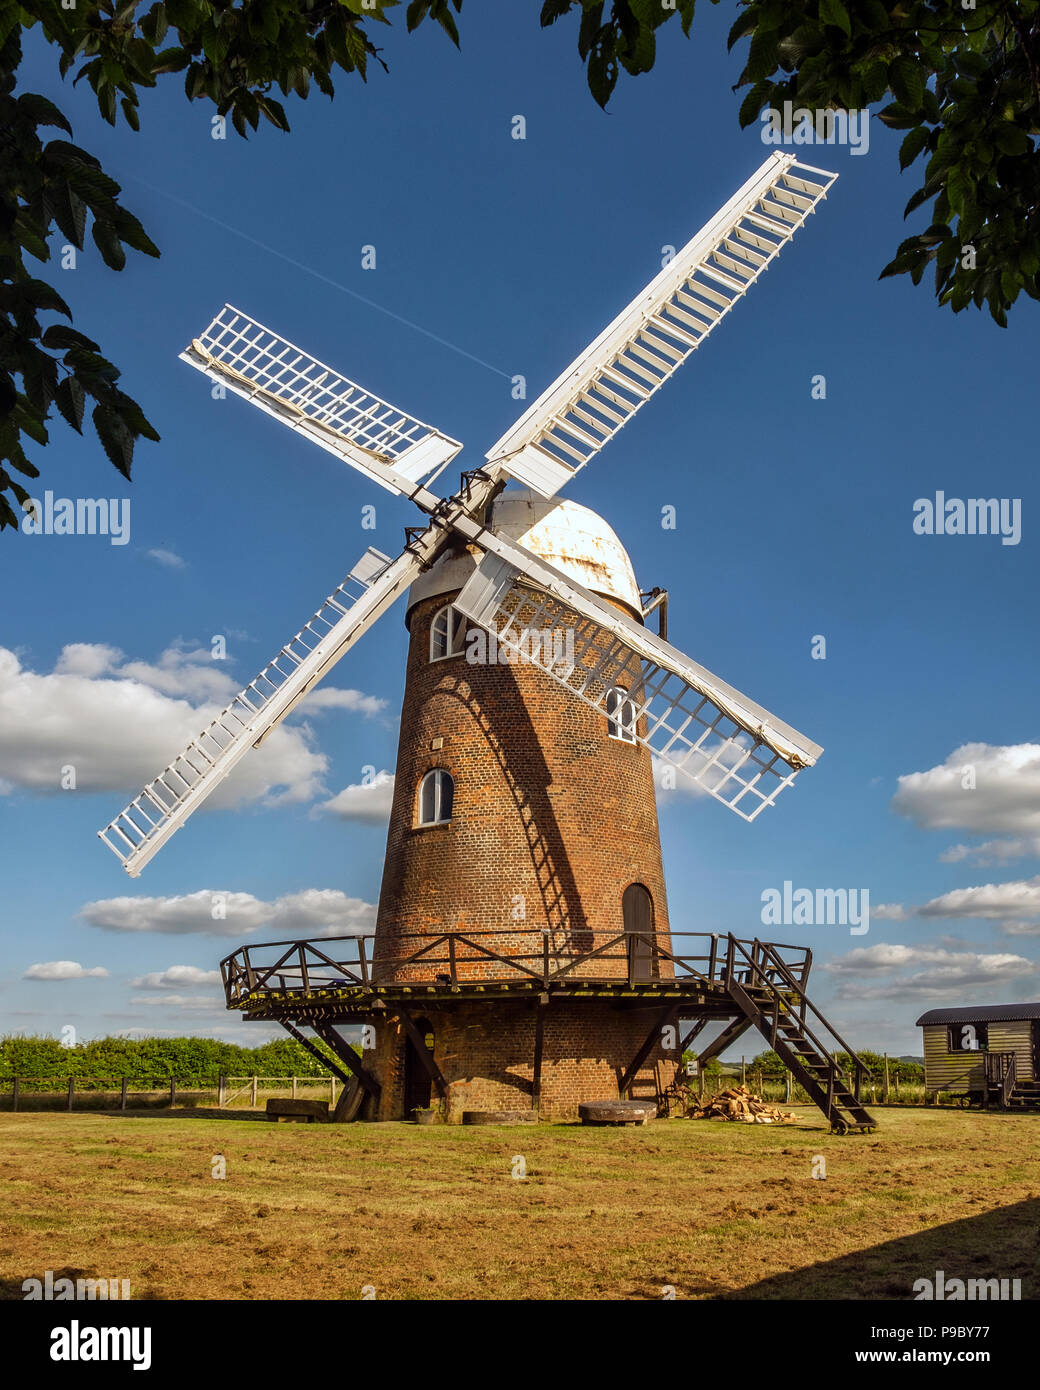 Wilton windmill, a Georgian tower mill built in 1821 & restored in 1976 is an established landmark & tourist attraction in the heart of Wiltshire, UK Stock Photo